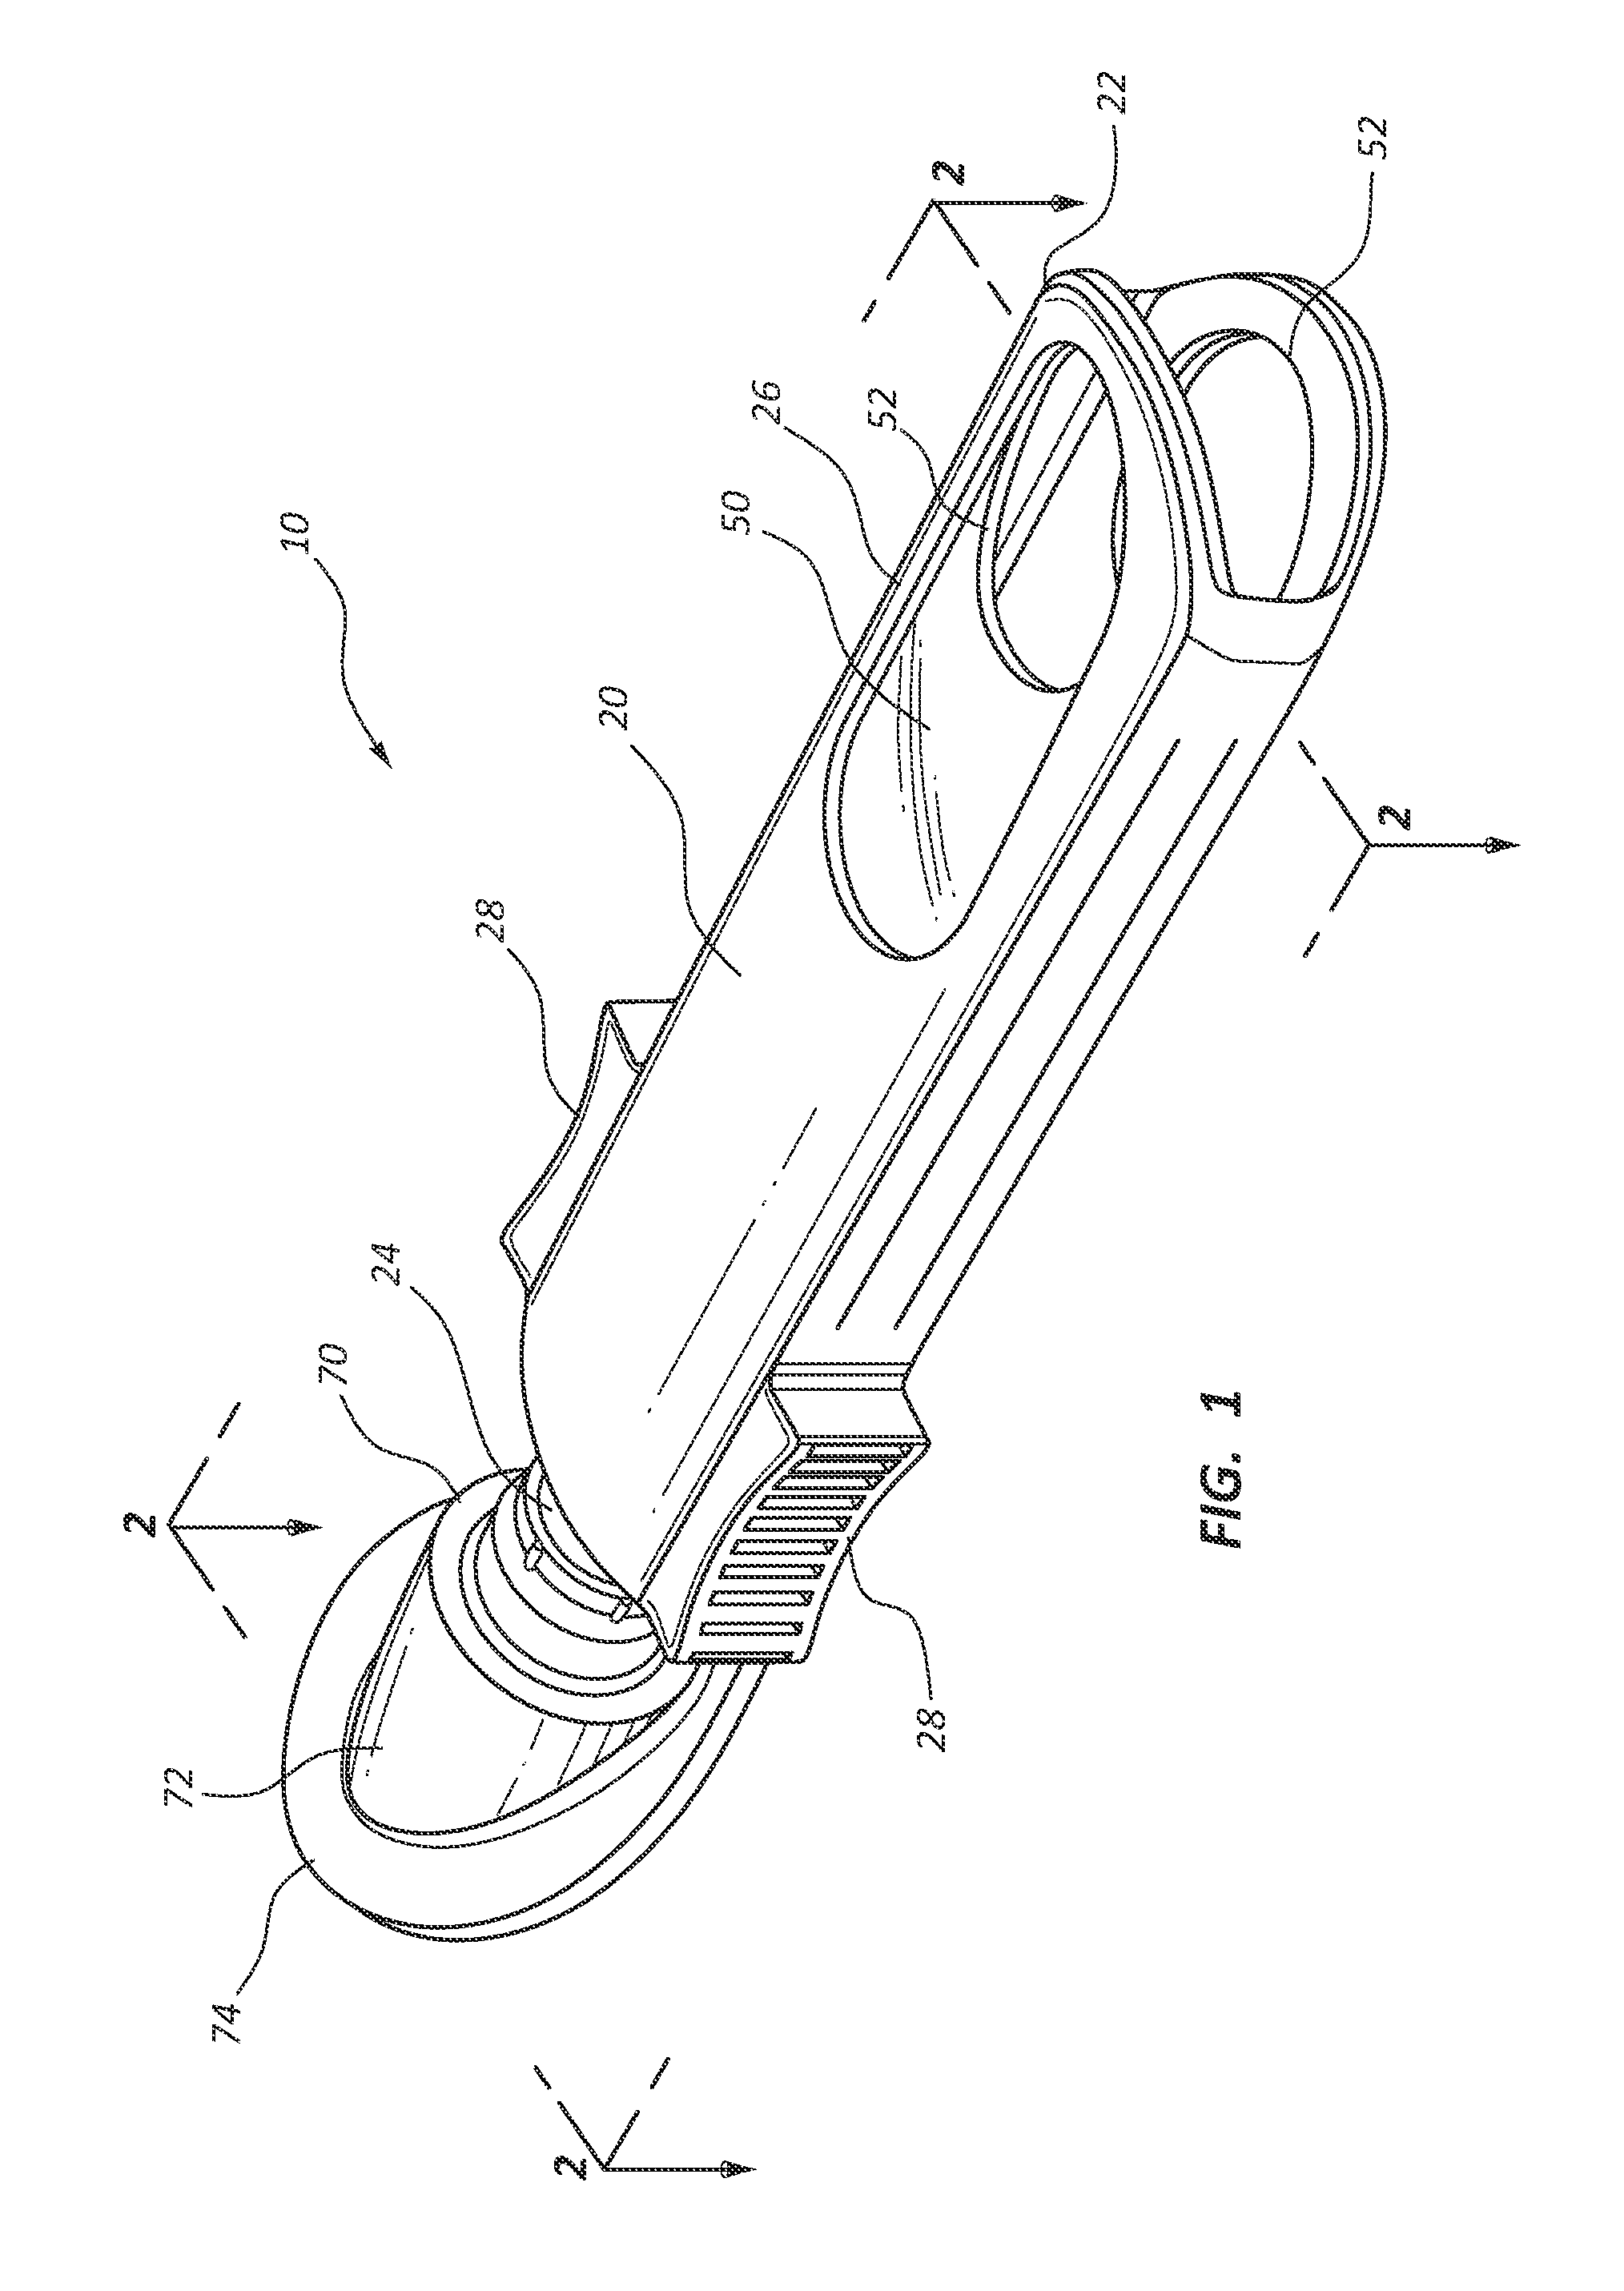 Integrated catheter securement and luer access device